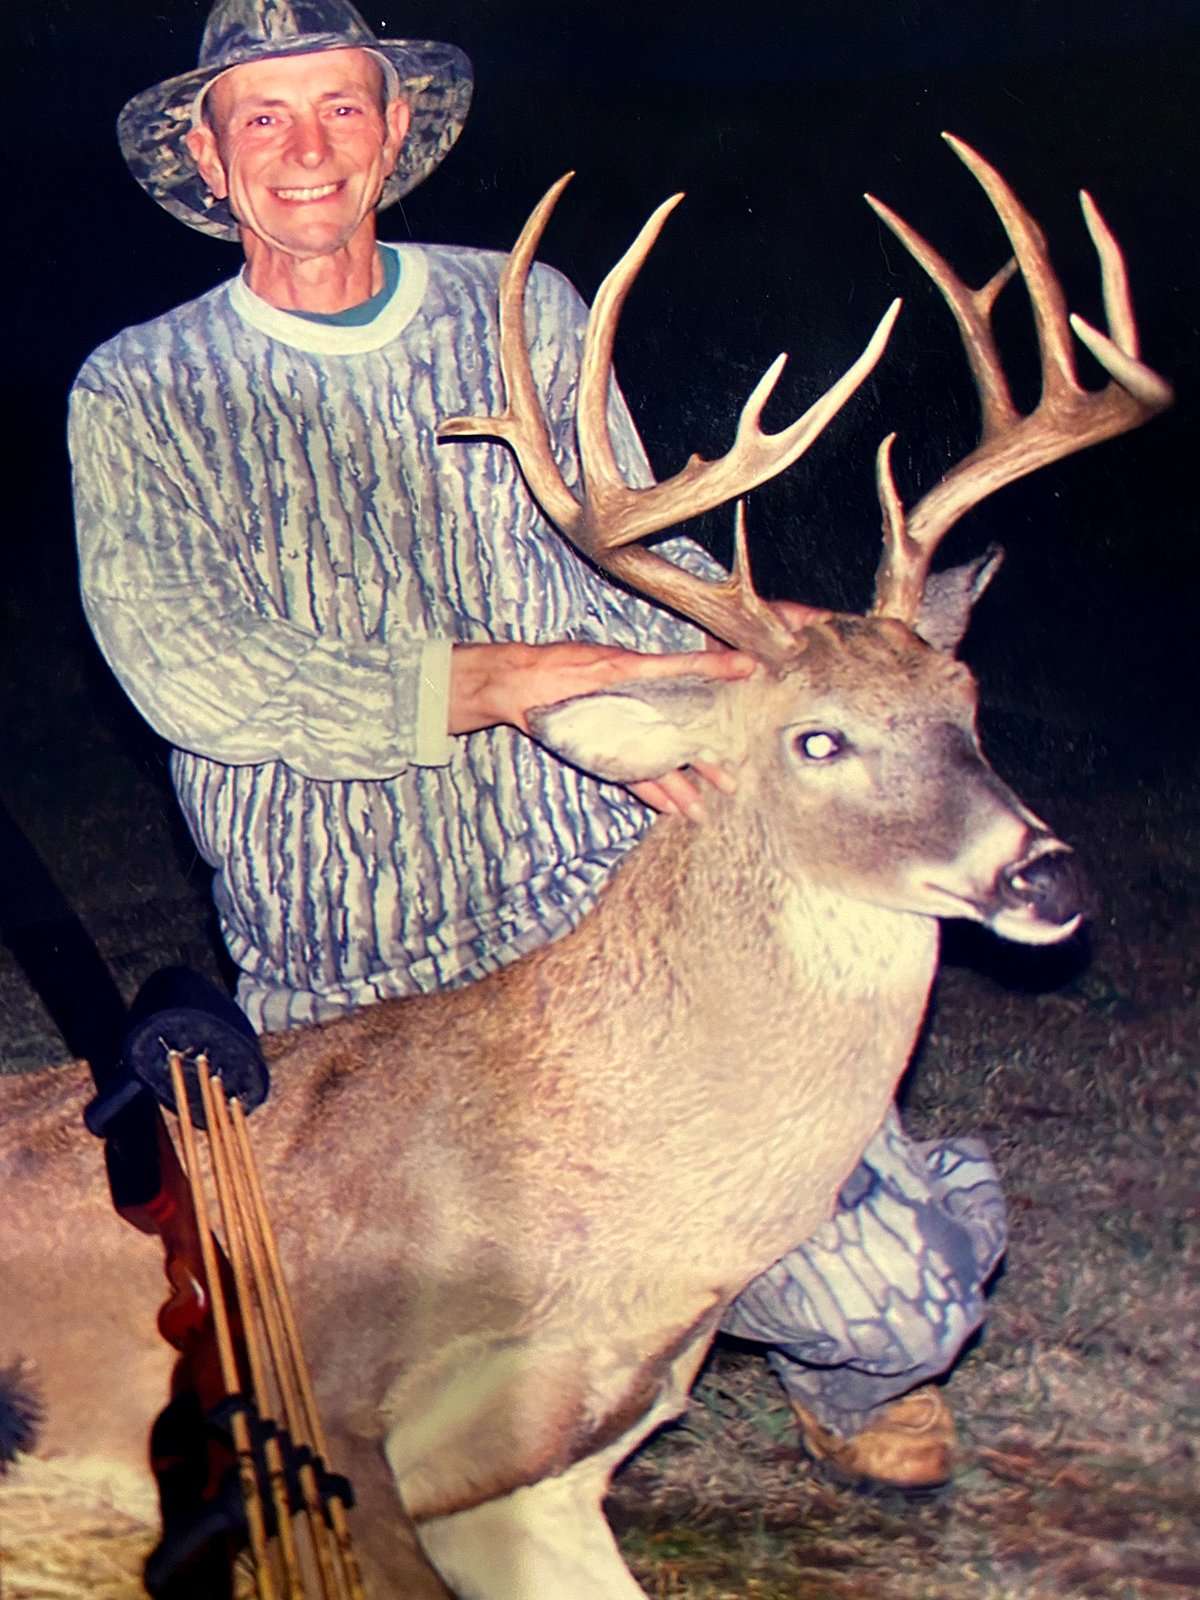 The late Jim Keim, Jerry Bowers' father-in-law, took this fine buck years ago while hunting at the McAlester Army Ammunition Plant. Bowers attributes most of what he knows about bowhunting to Keim's mentorship. Image courtesy of Jerry Bowers